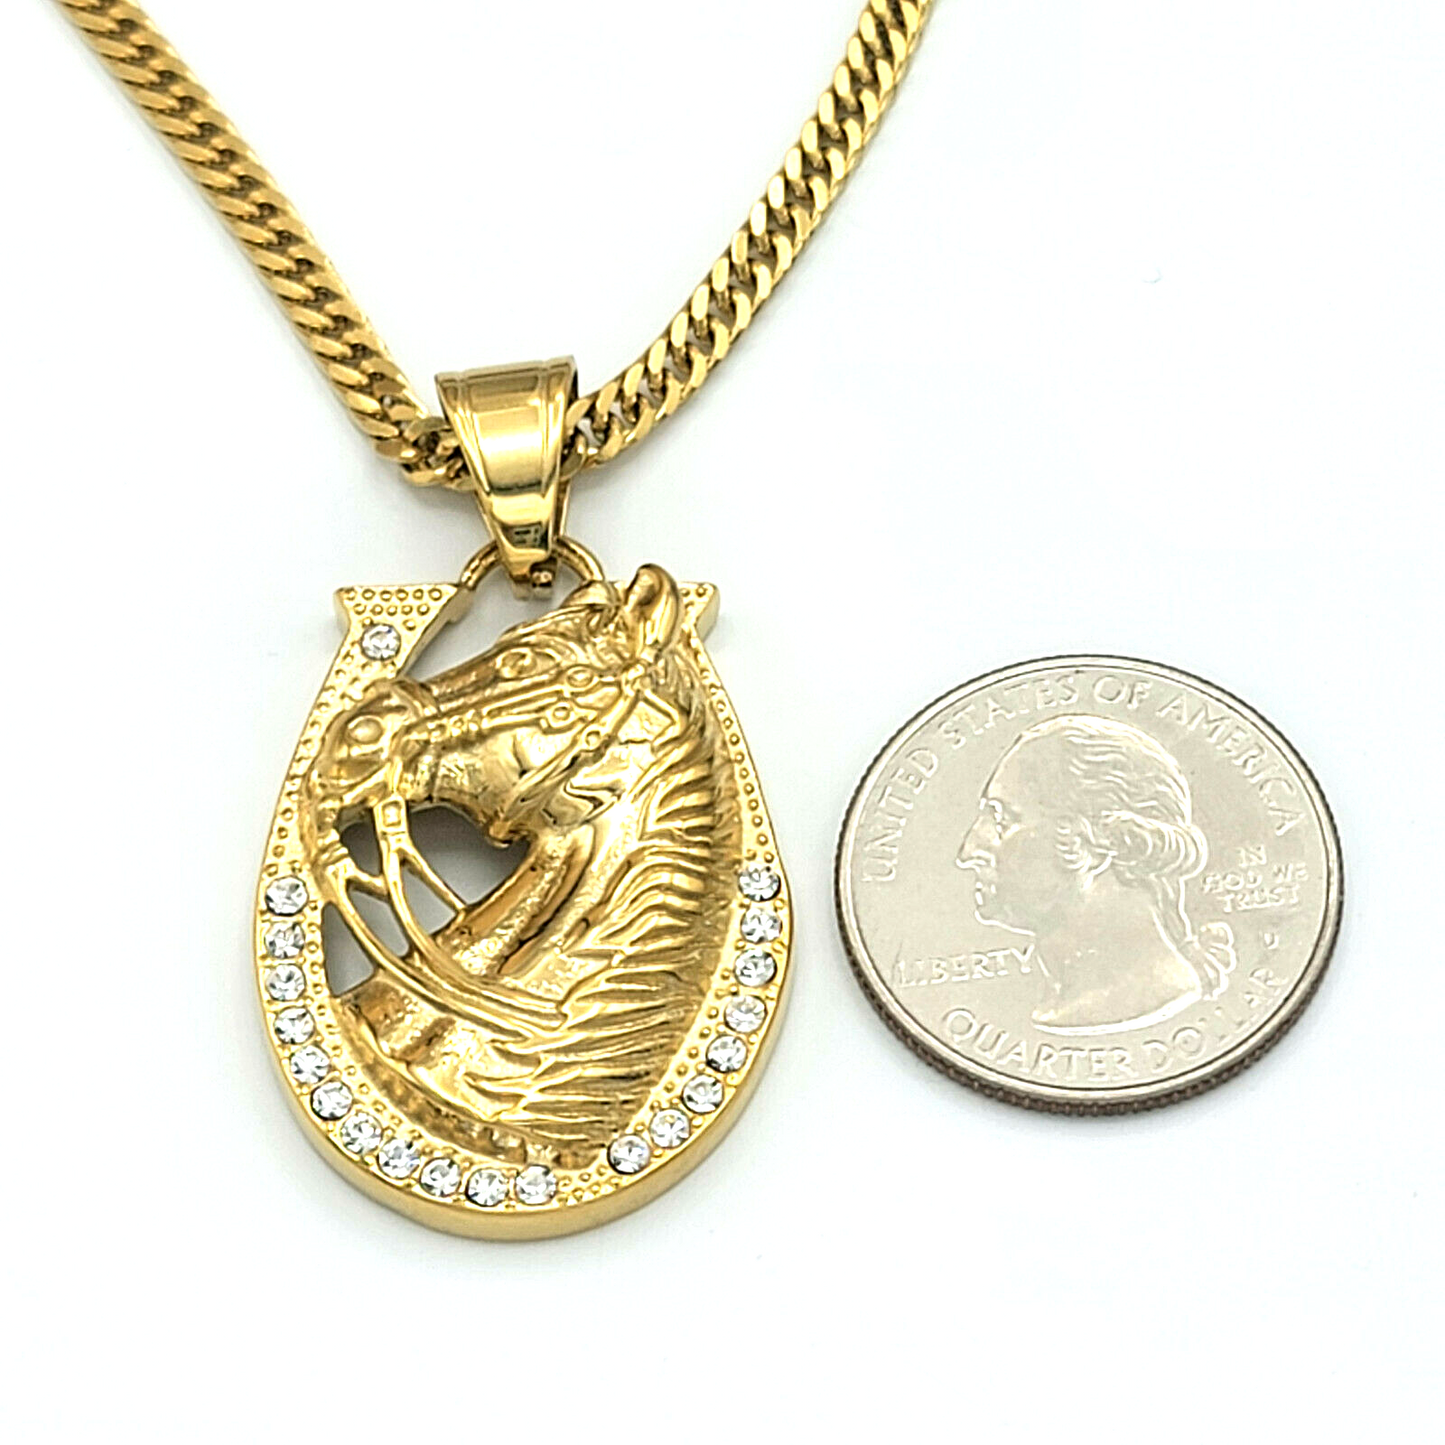 Necklaces - Stainless Steel Gold Plated. Horse Shoe Pendant & Chain.